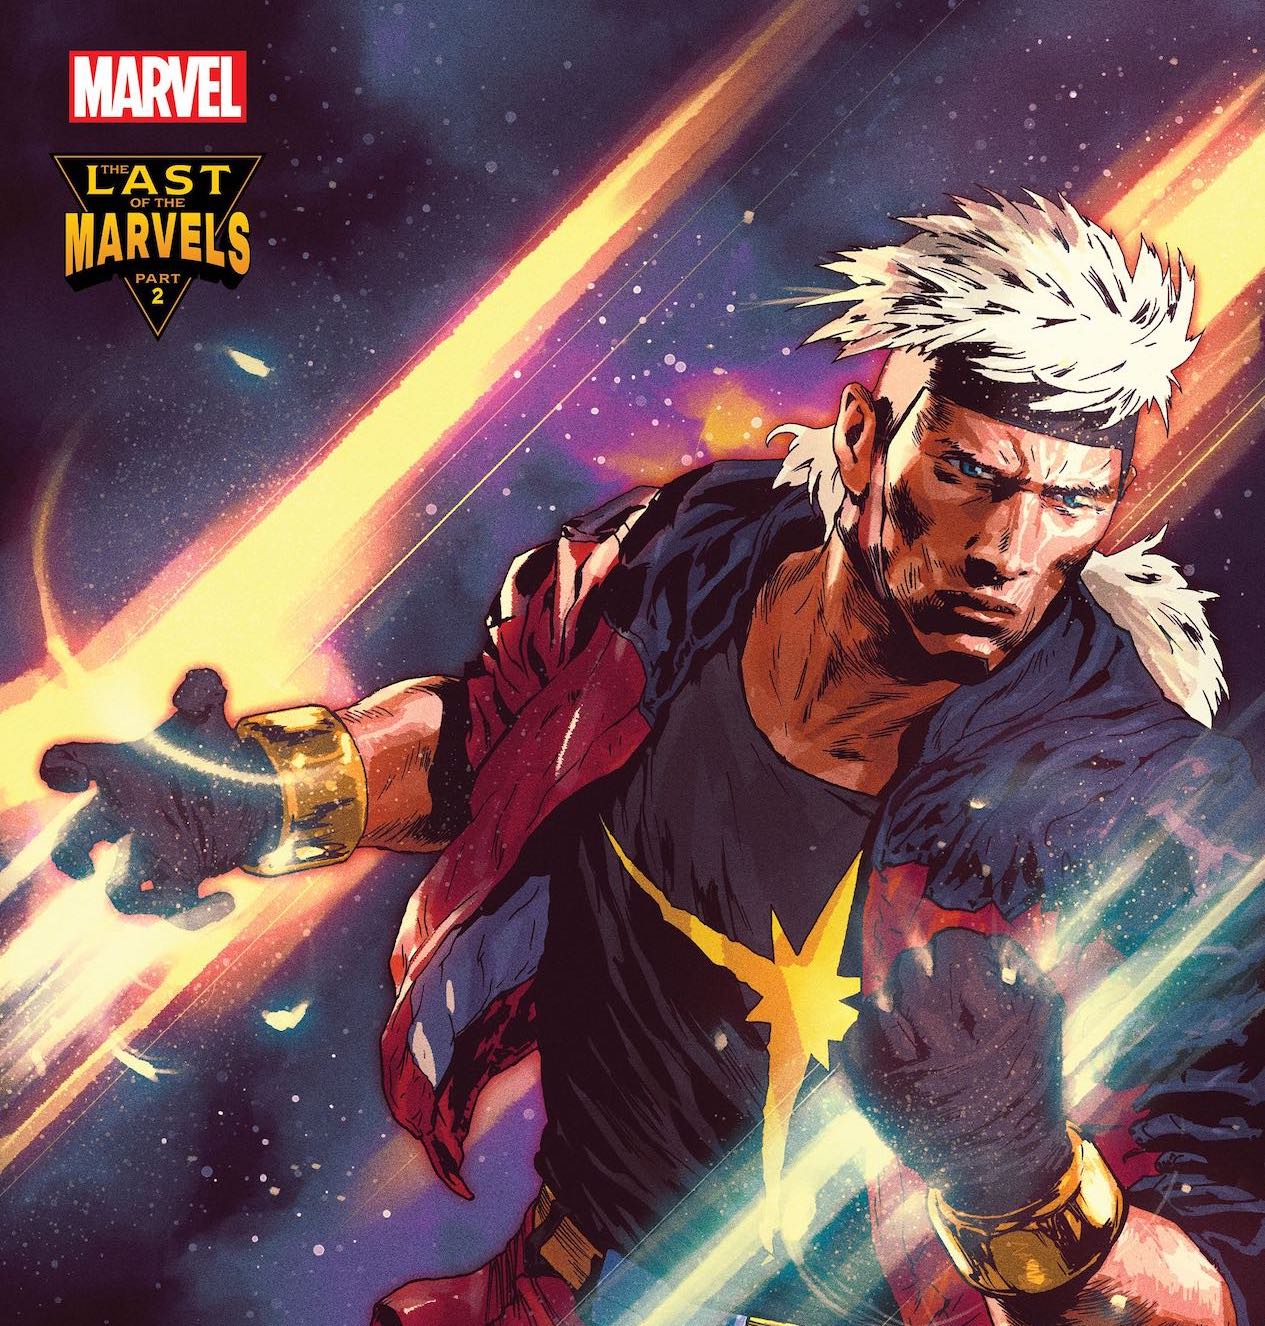 Marvel reveals "The Last of the Marvels" to bring back Captain Marvel's son Genis-Vell